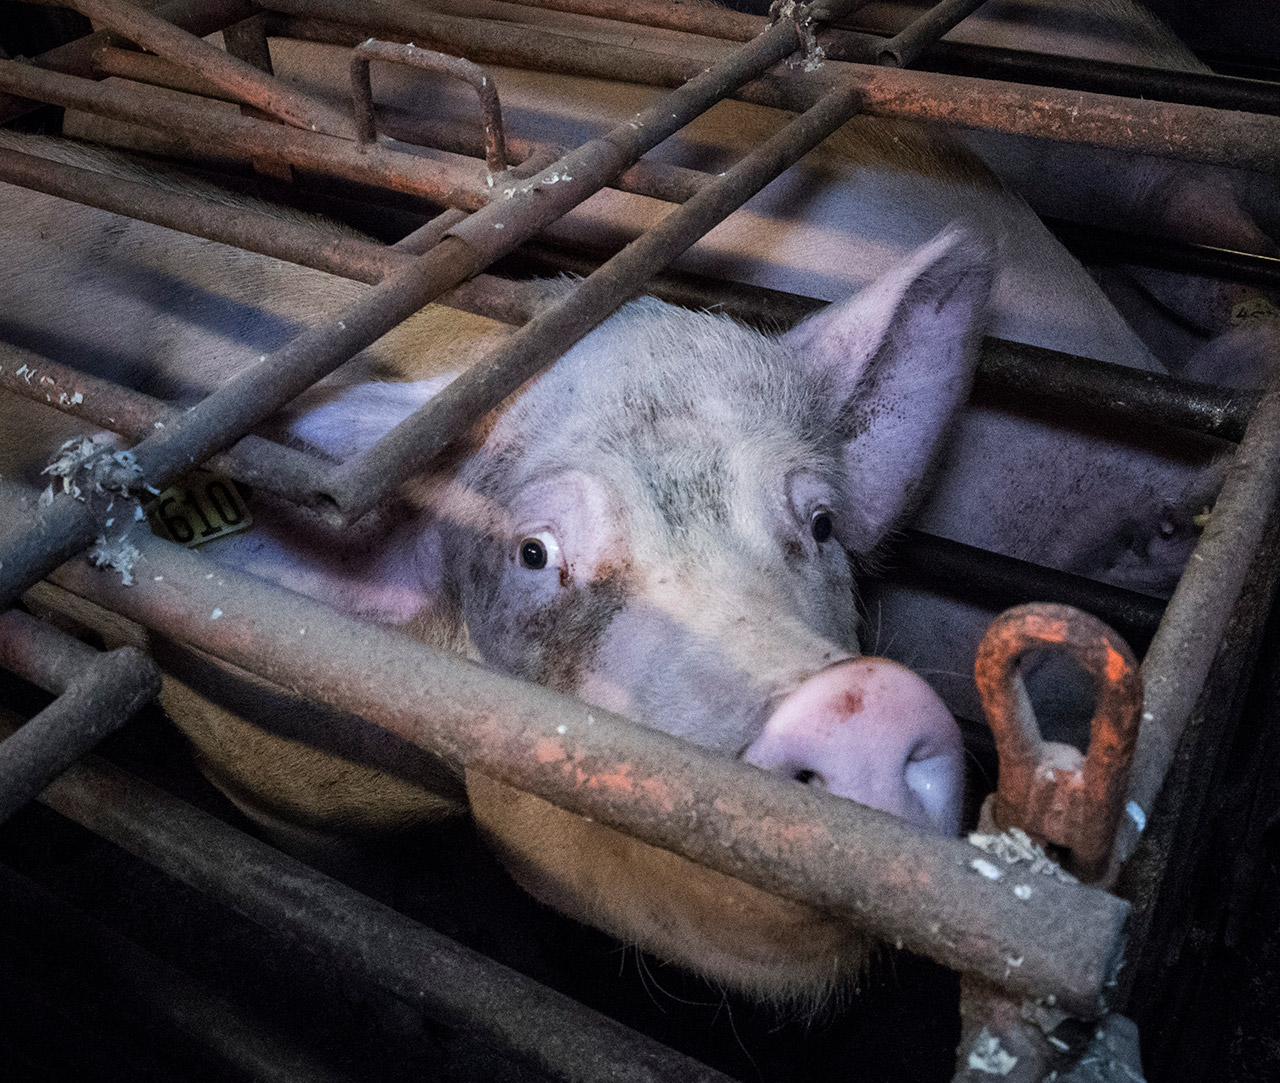 Female pig in a crate looking at camera